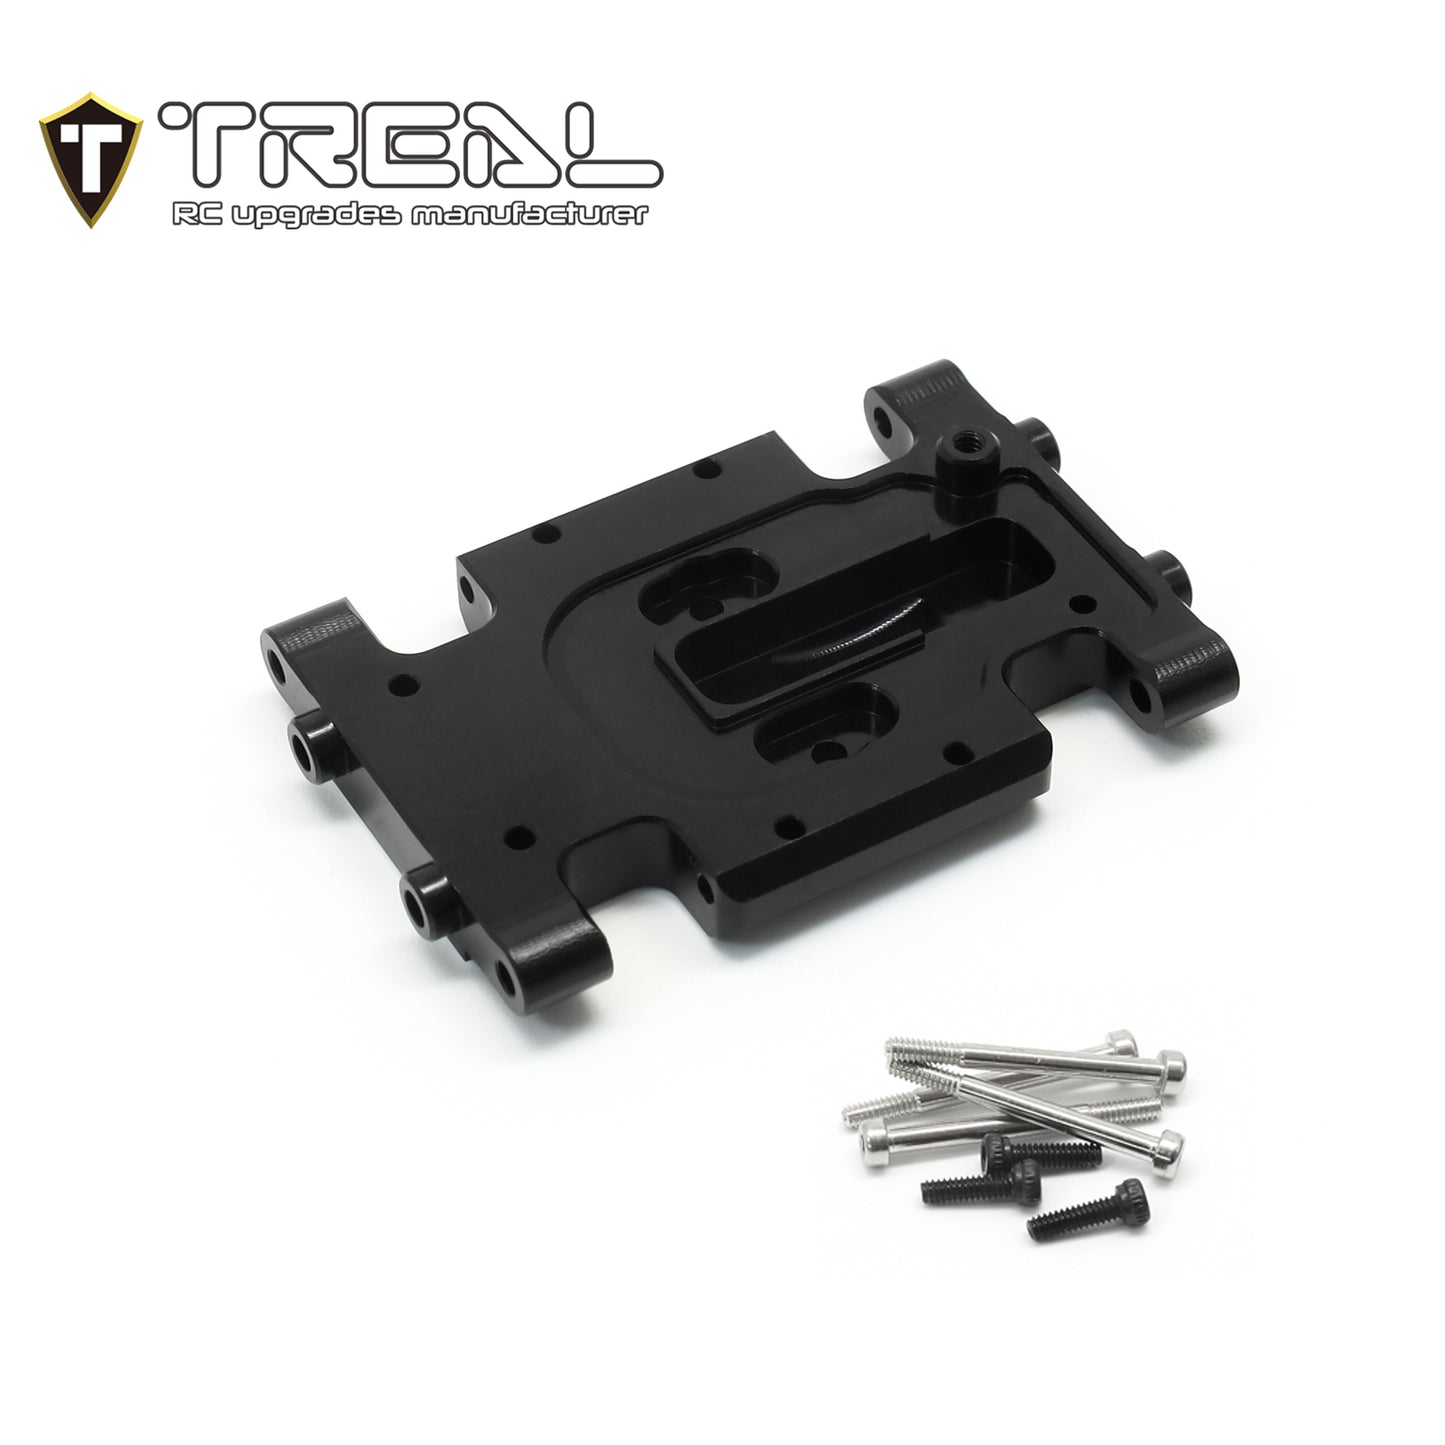 TREAL Aluminum 7075 Center Skid Plate CNC Machined Upgrdes Compatible with 1/24 Axial AX24